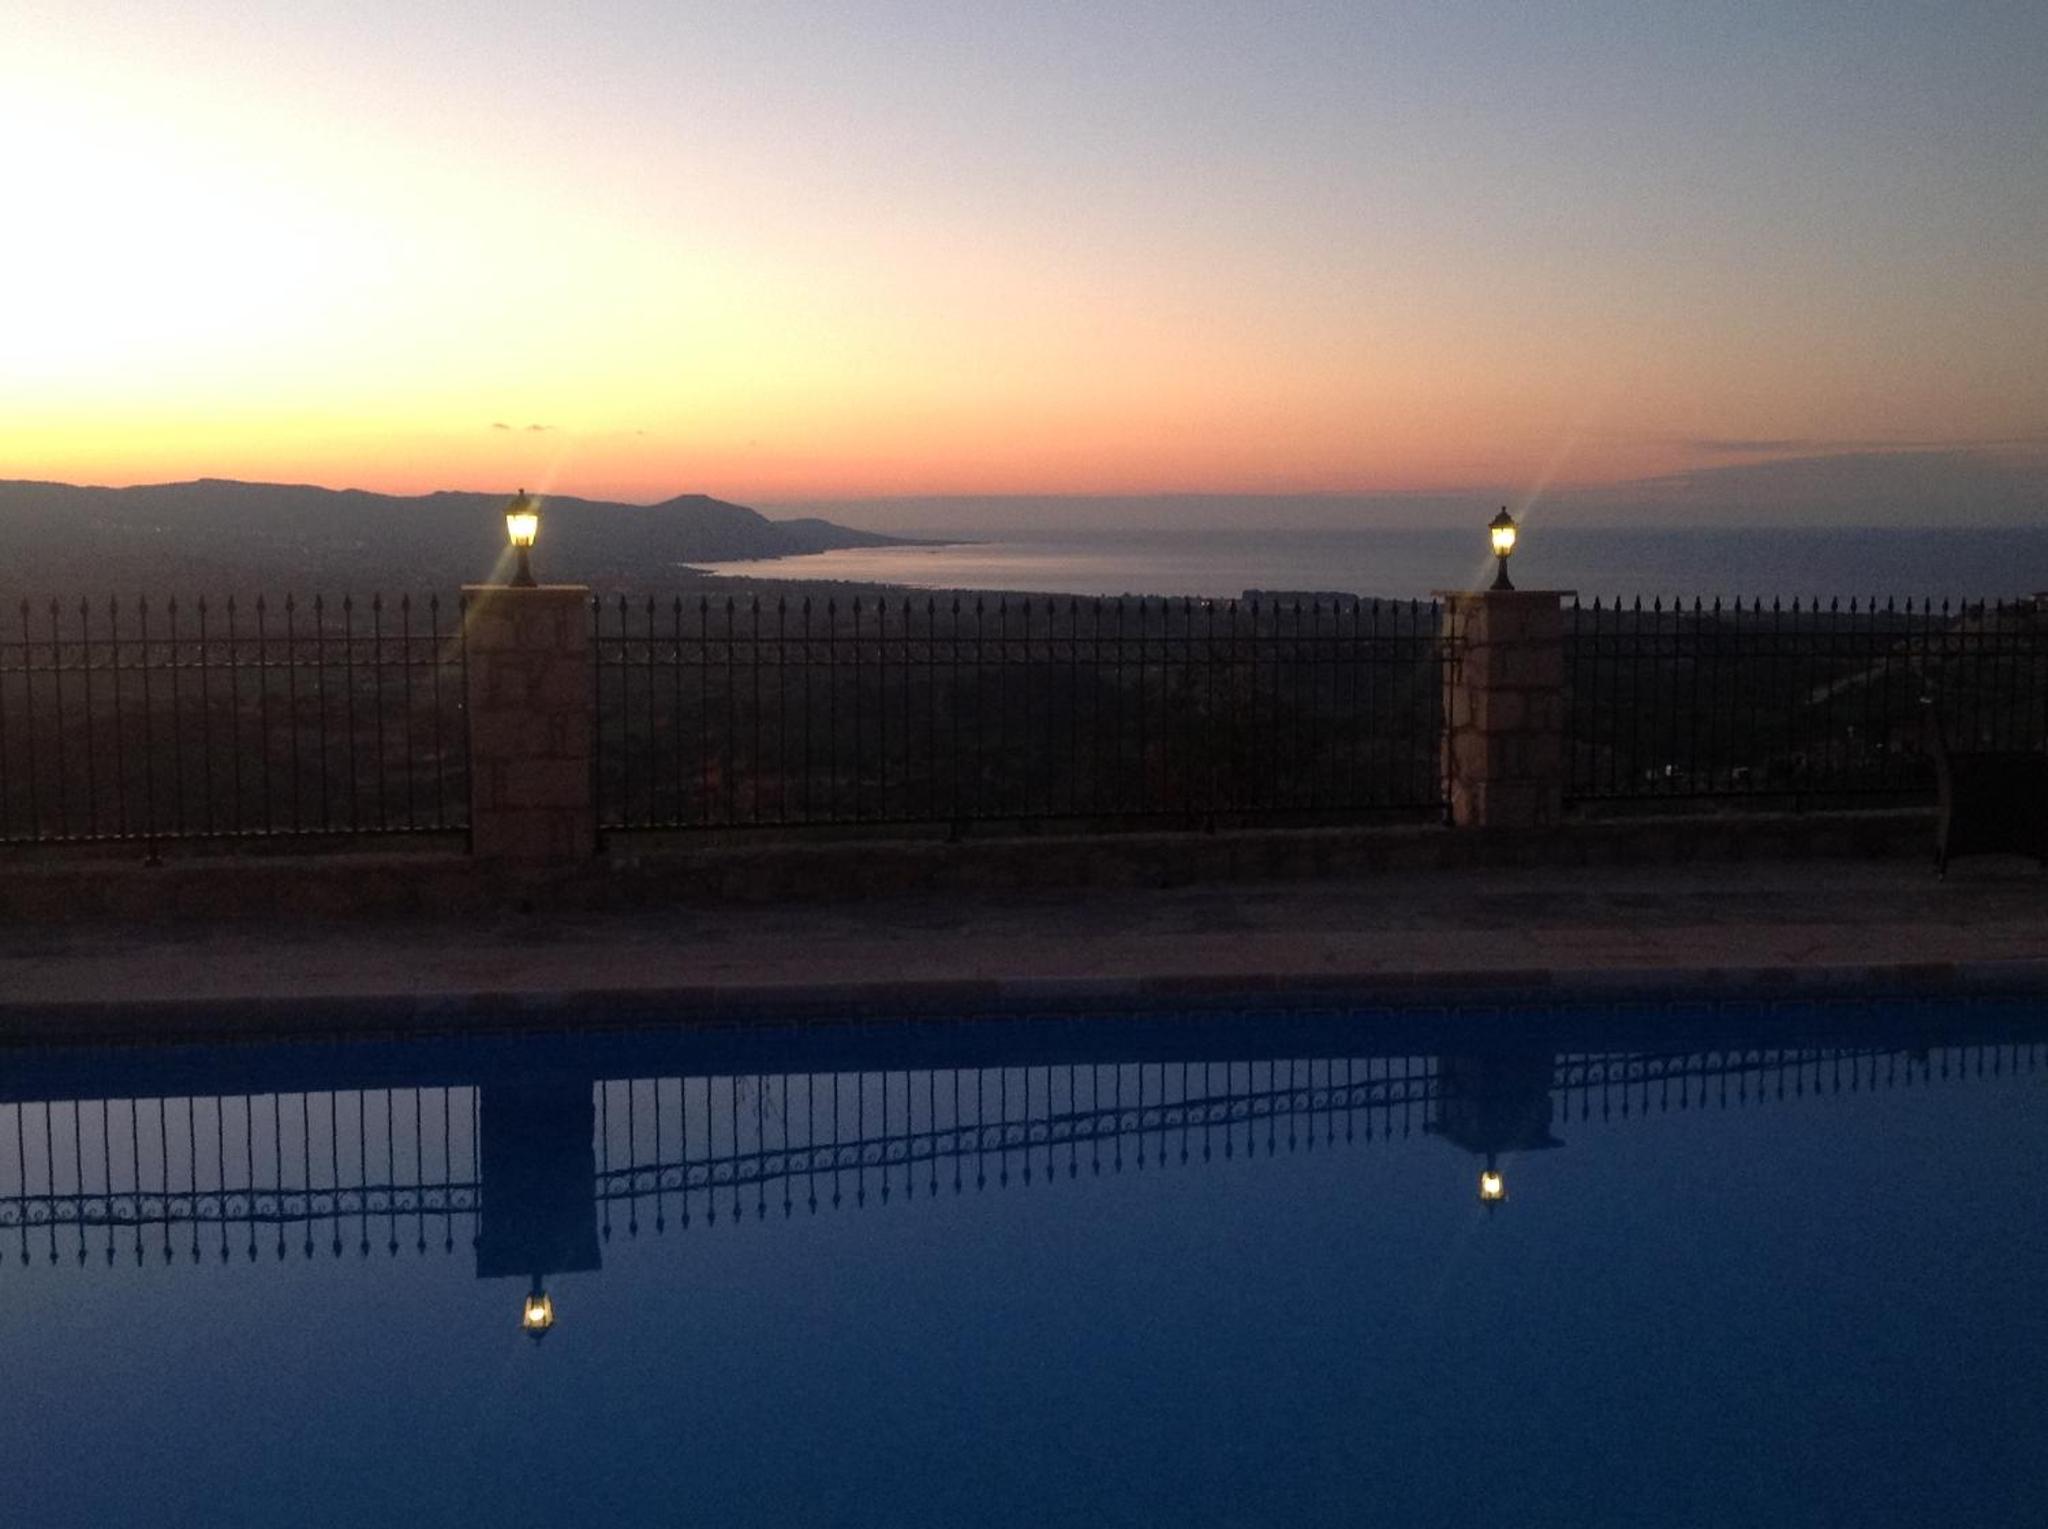 Private villa, sea views, total privacy, heated pool, 25 mins from Paphos